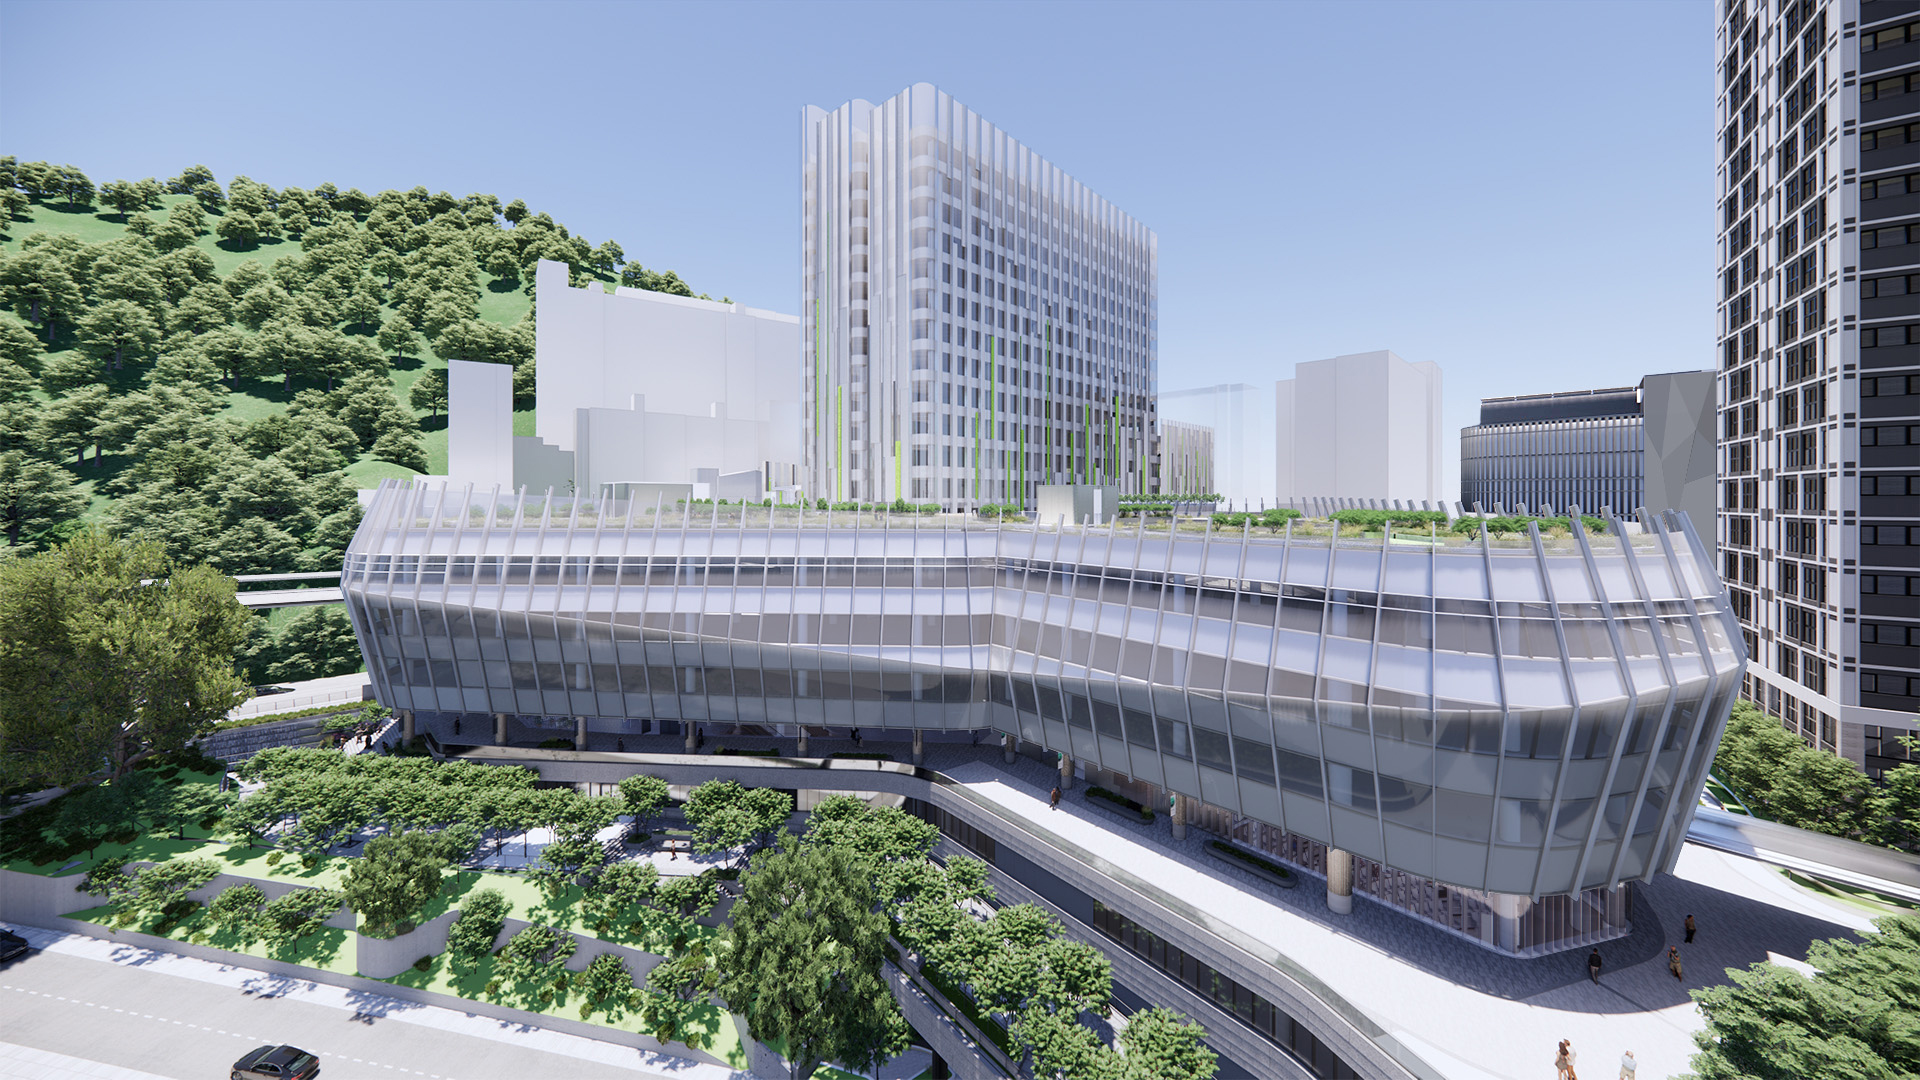 Pokfield Campus will be the modern home for HKU Business School